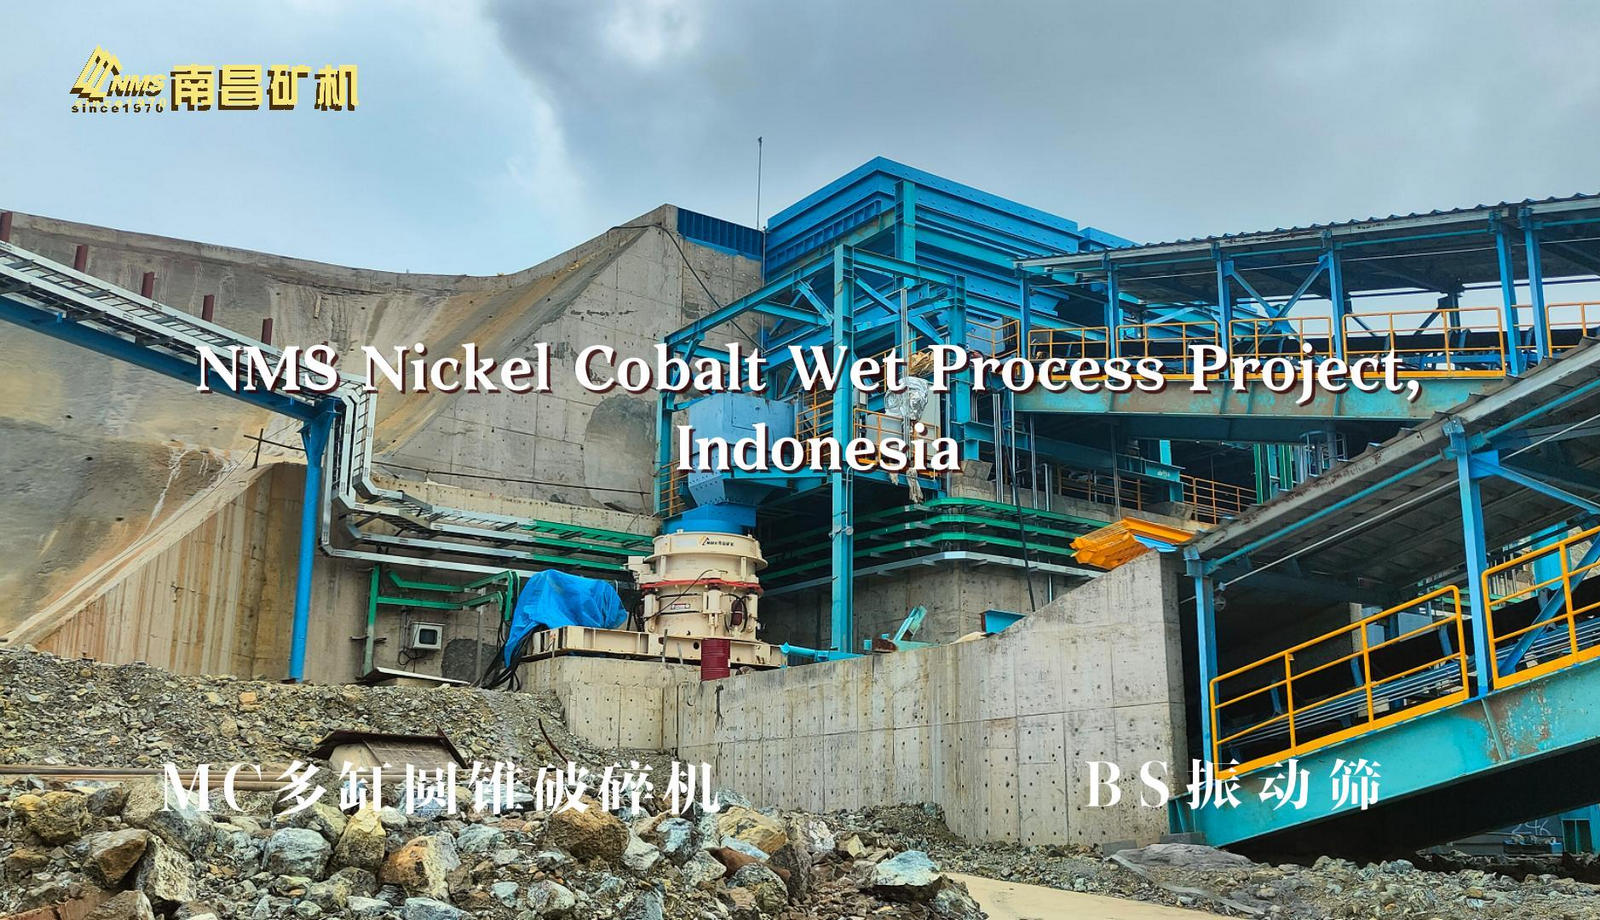 NMS Nickel Cobalt Wet Process Project, Indonesia